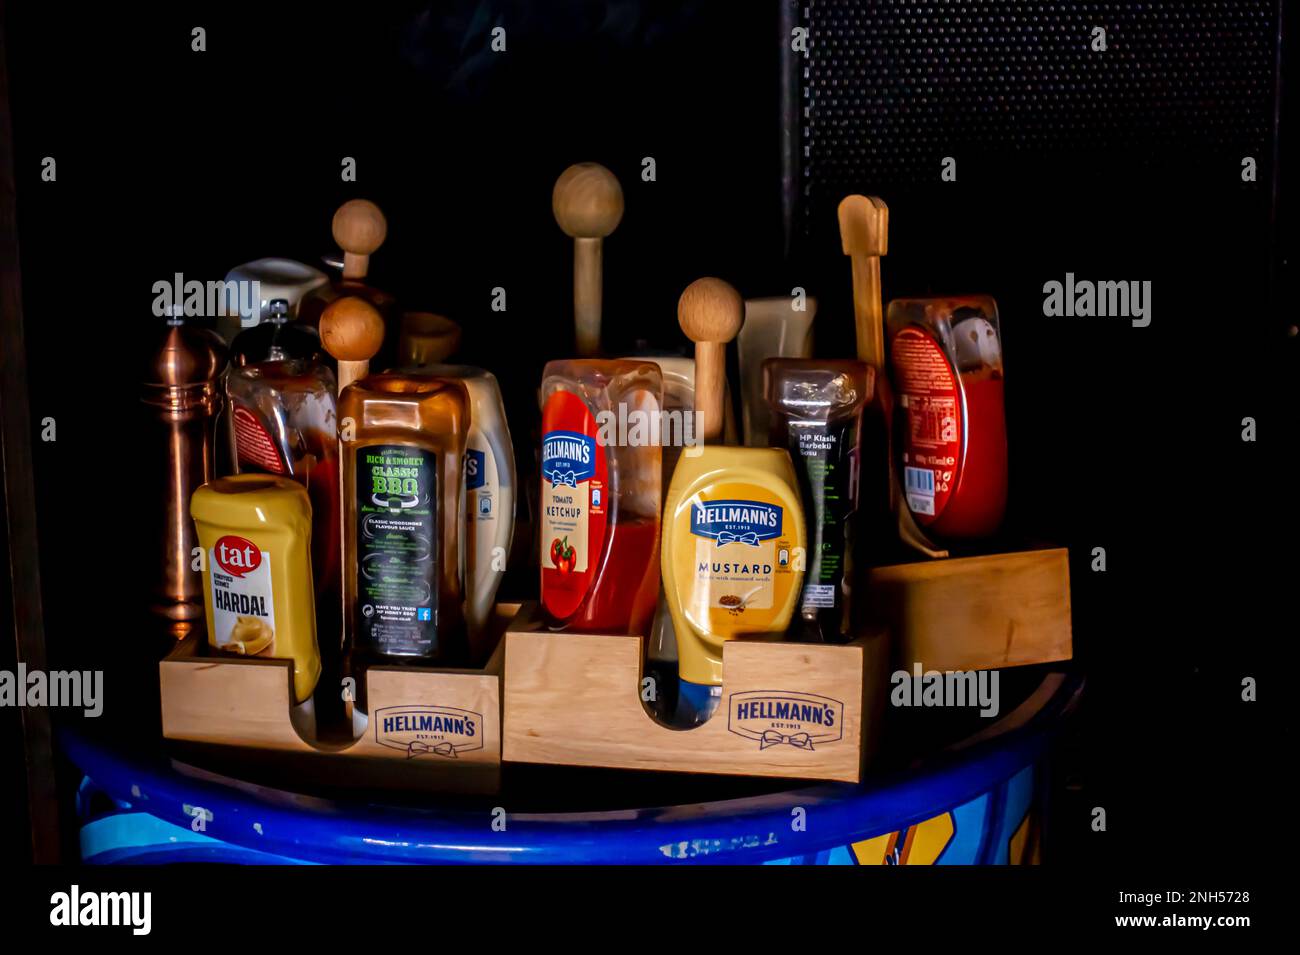 Ketchup, mustard, sauce on a tray. Condiments on a tray. Hellmann's branded tray for condiemnts, serving in restaurants Stock Photo